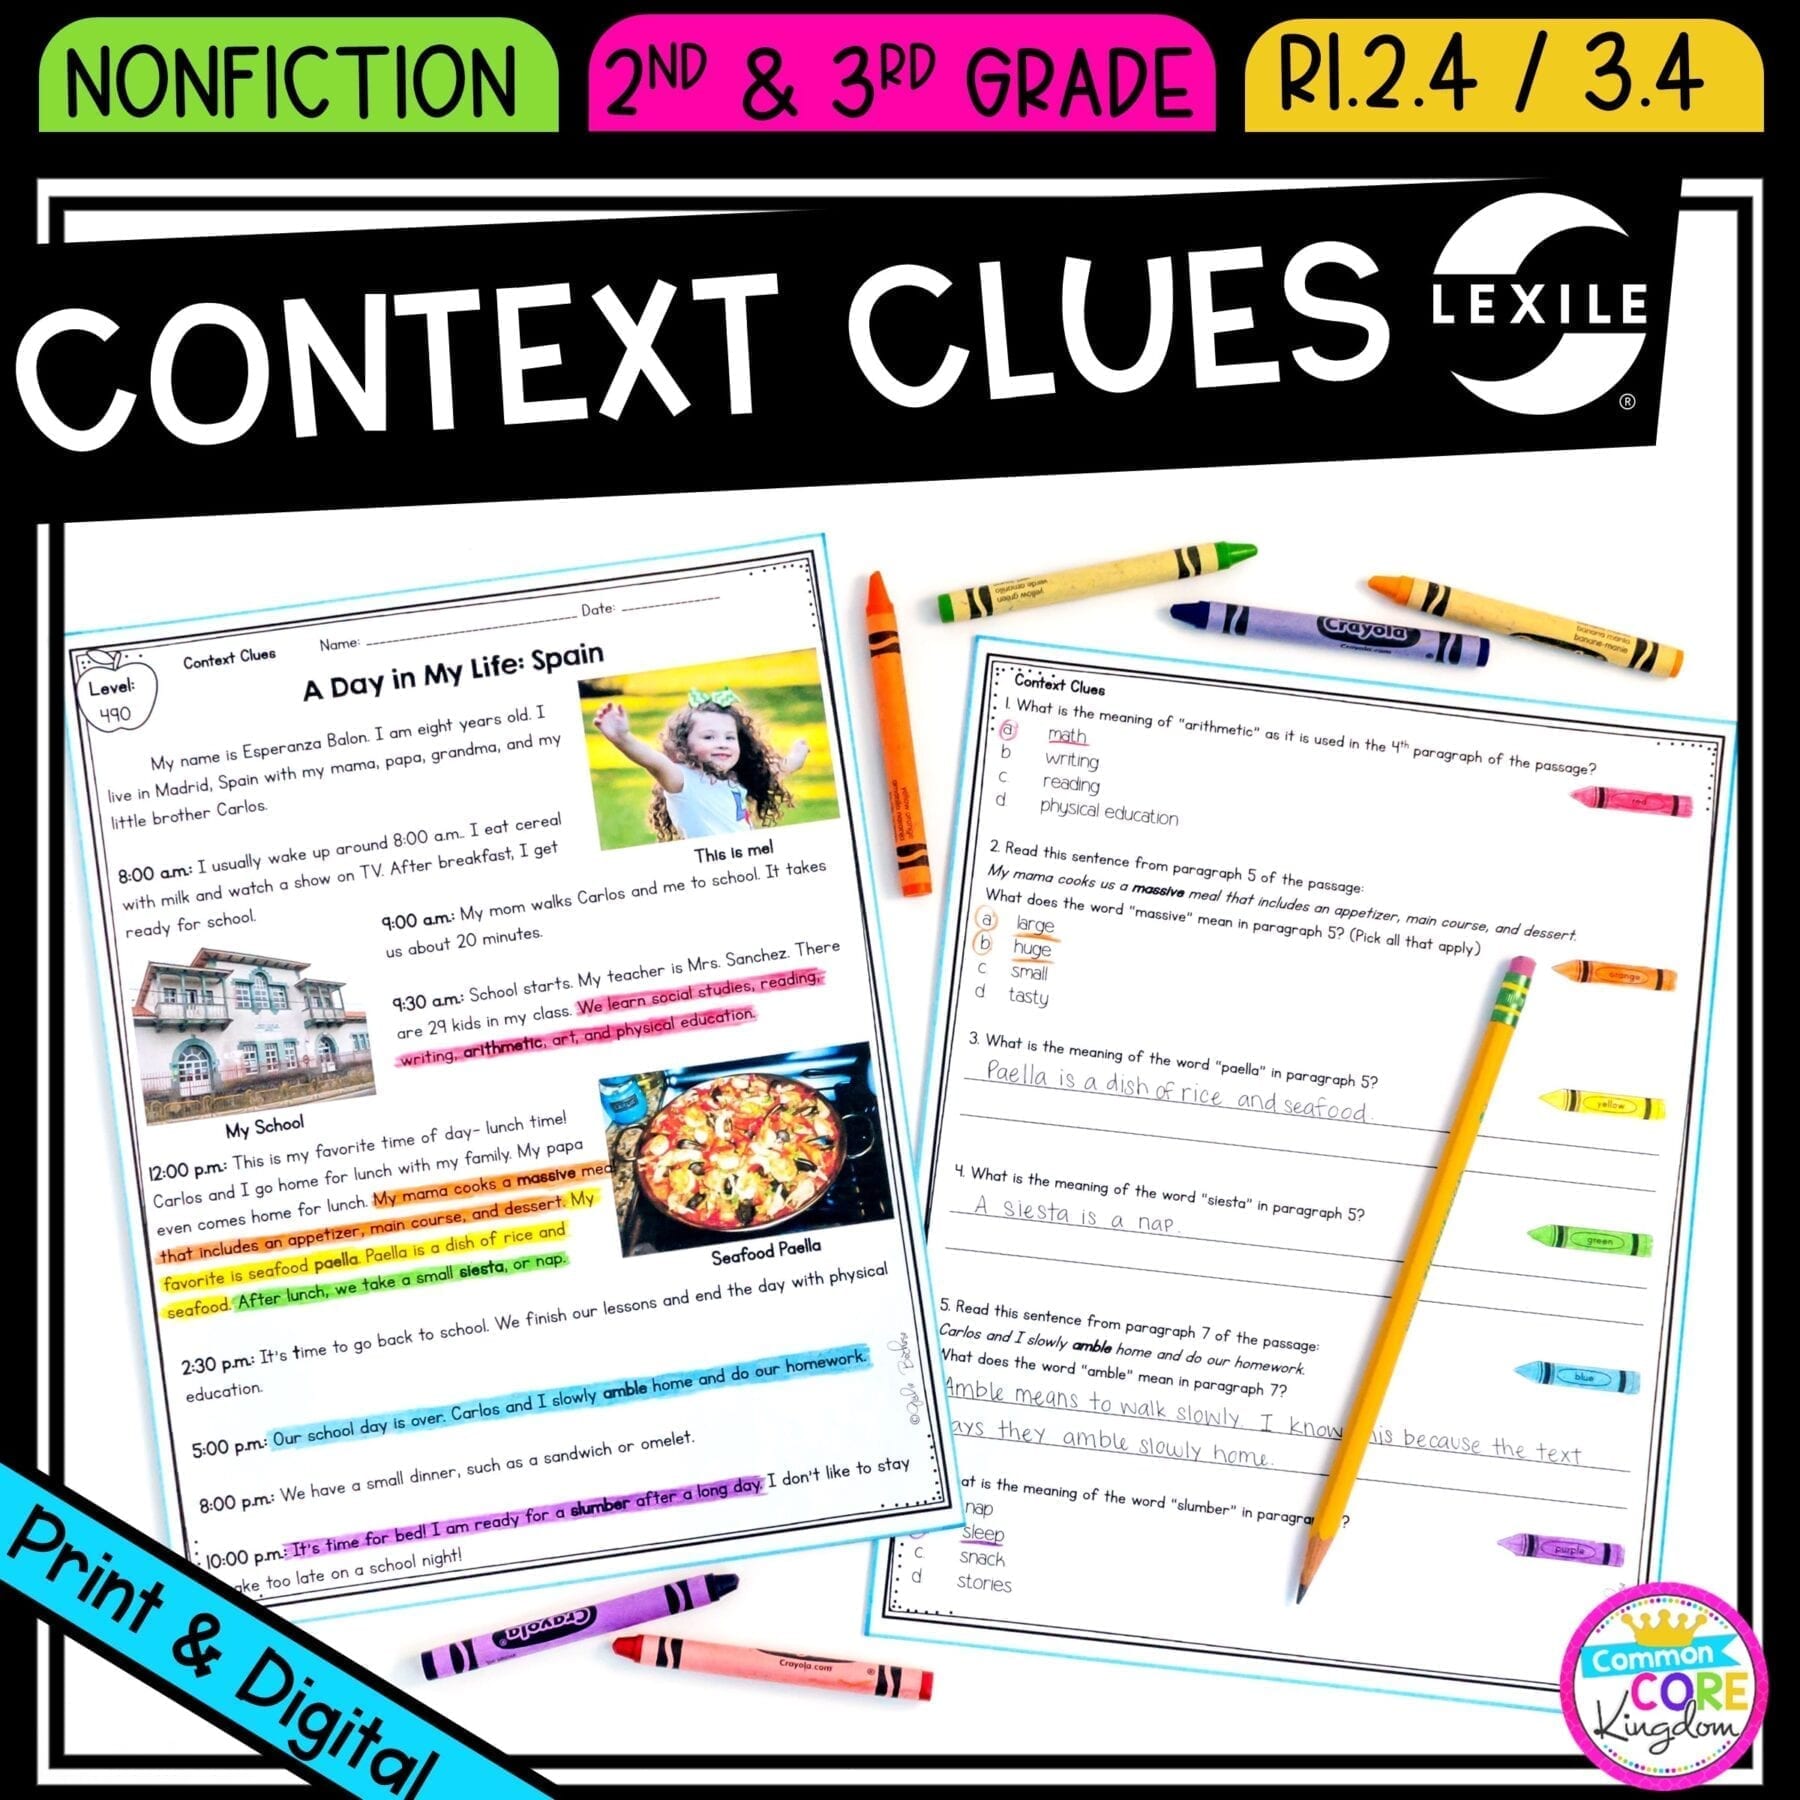 Context Clues in Nonfiction for 2nd & 3rd grade cover showing printable and digital worksheets